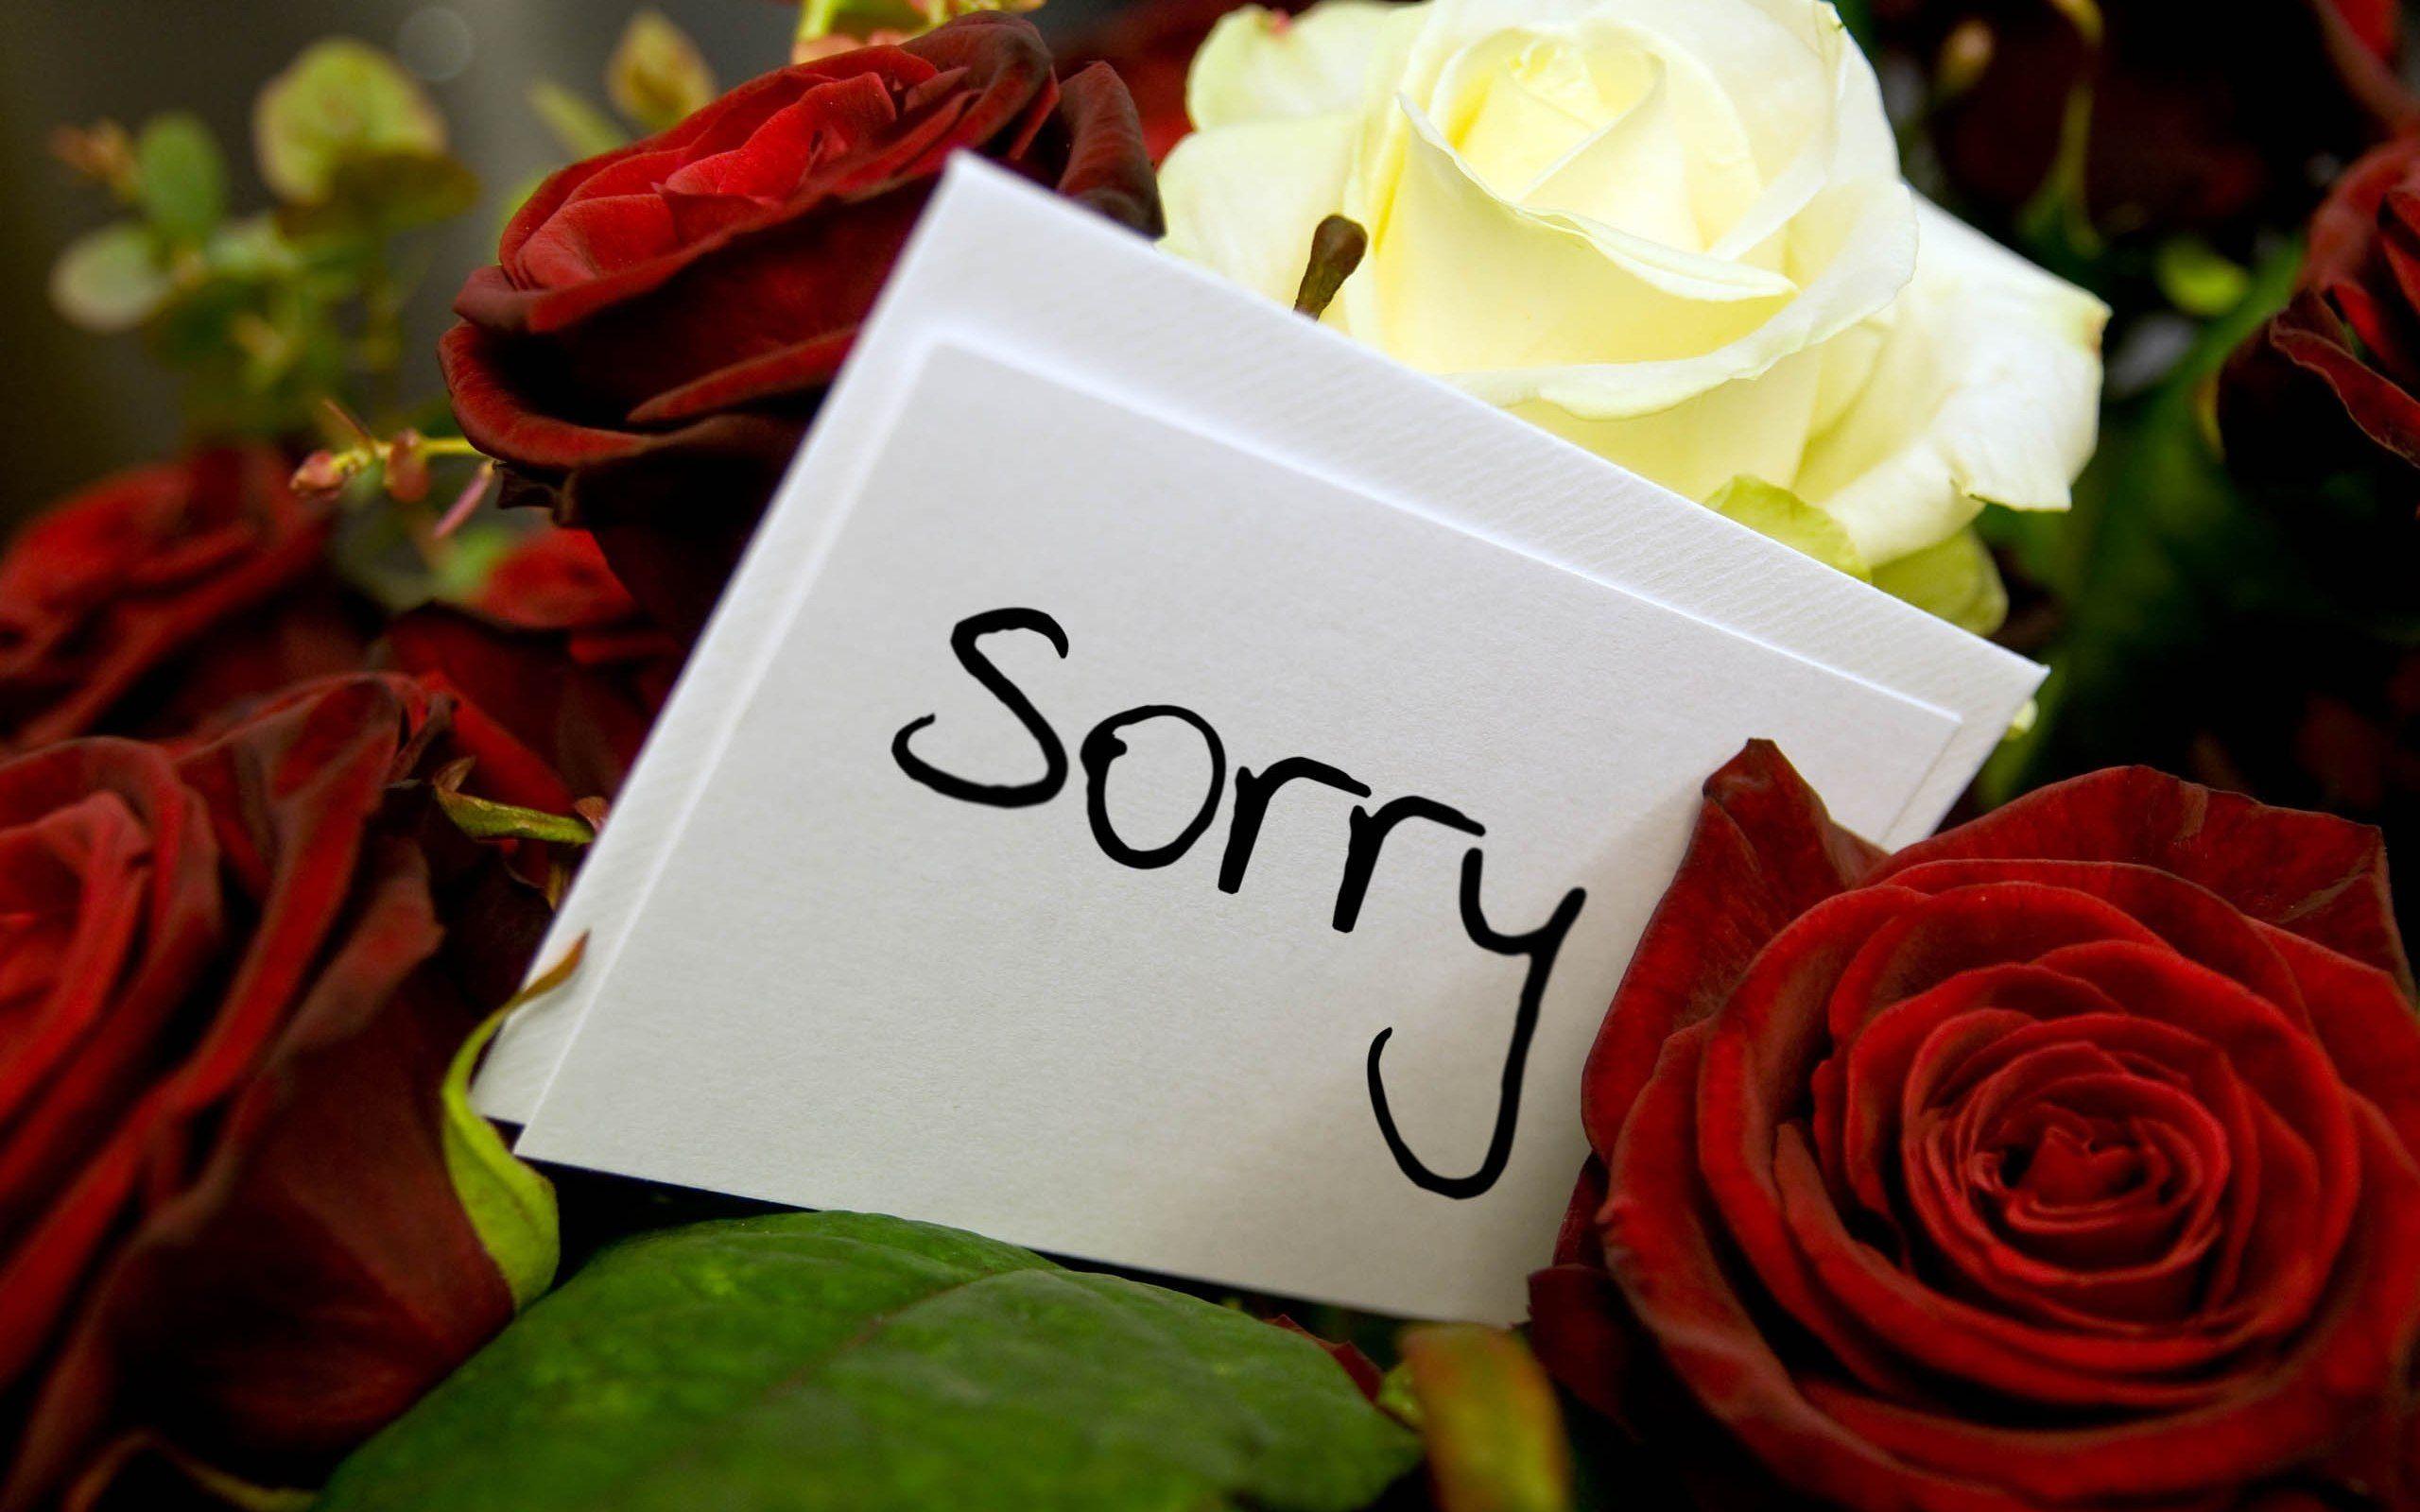 Cute Apology Messages to a Lover with Sorry Image